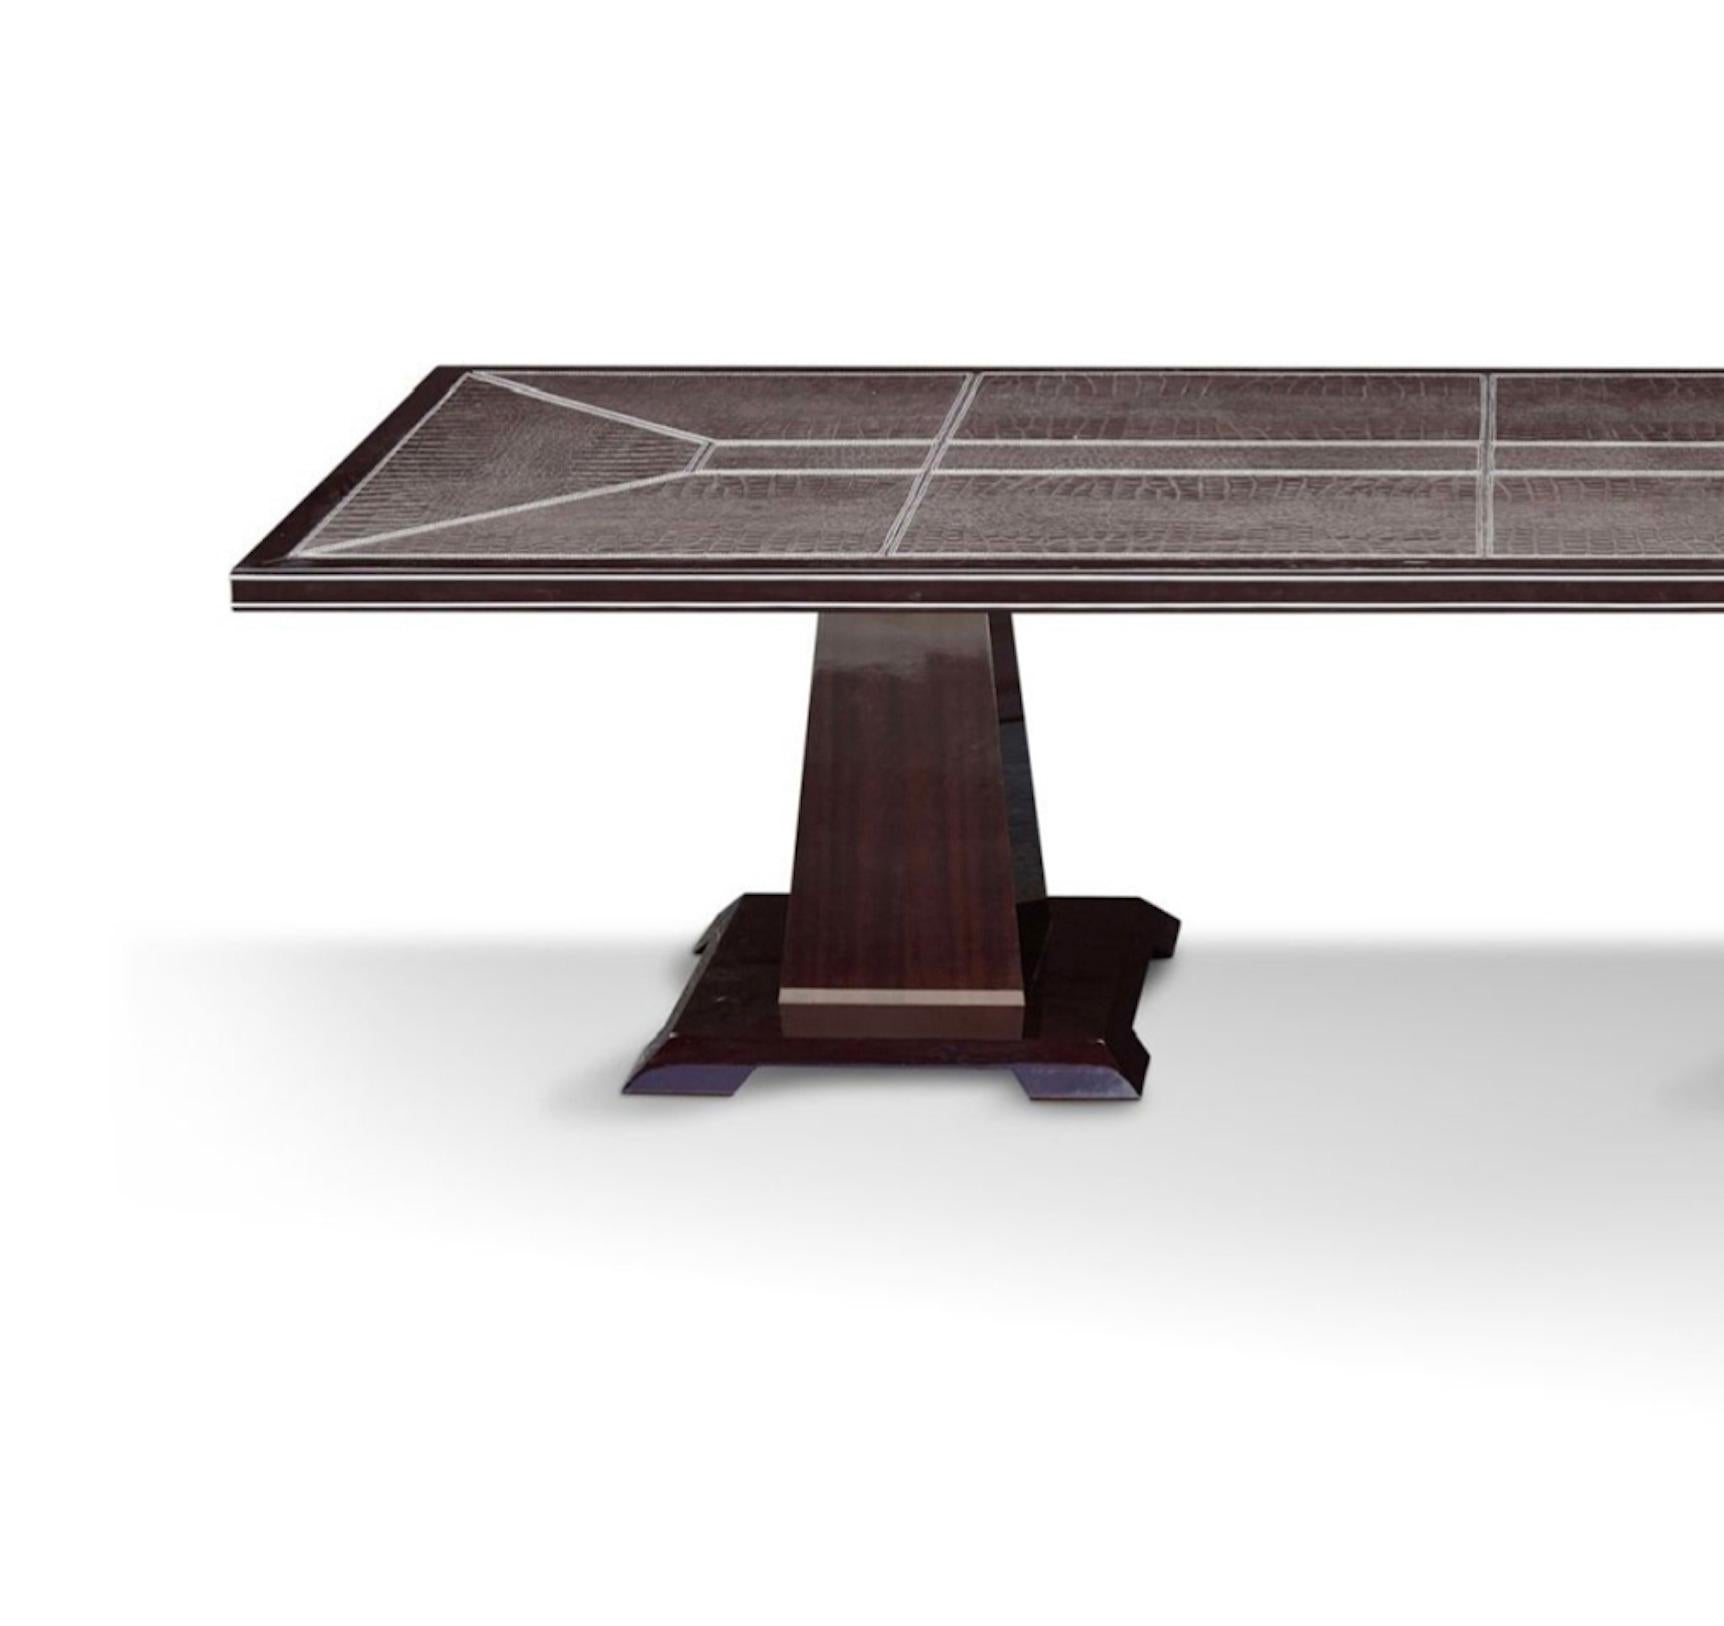 Rectangular table in mahogany wood and shelf in printed leather with rope-colored stitching and nickel-plated steel details
Dimension: cm 300 x 100 x h. 75.